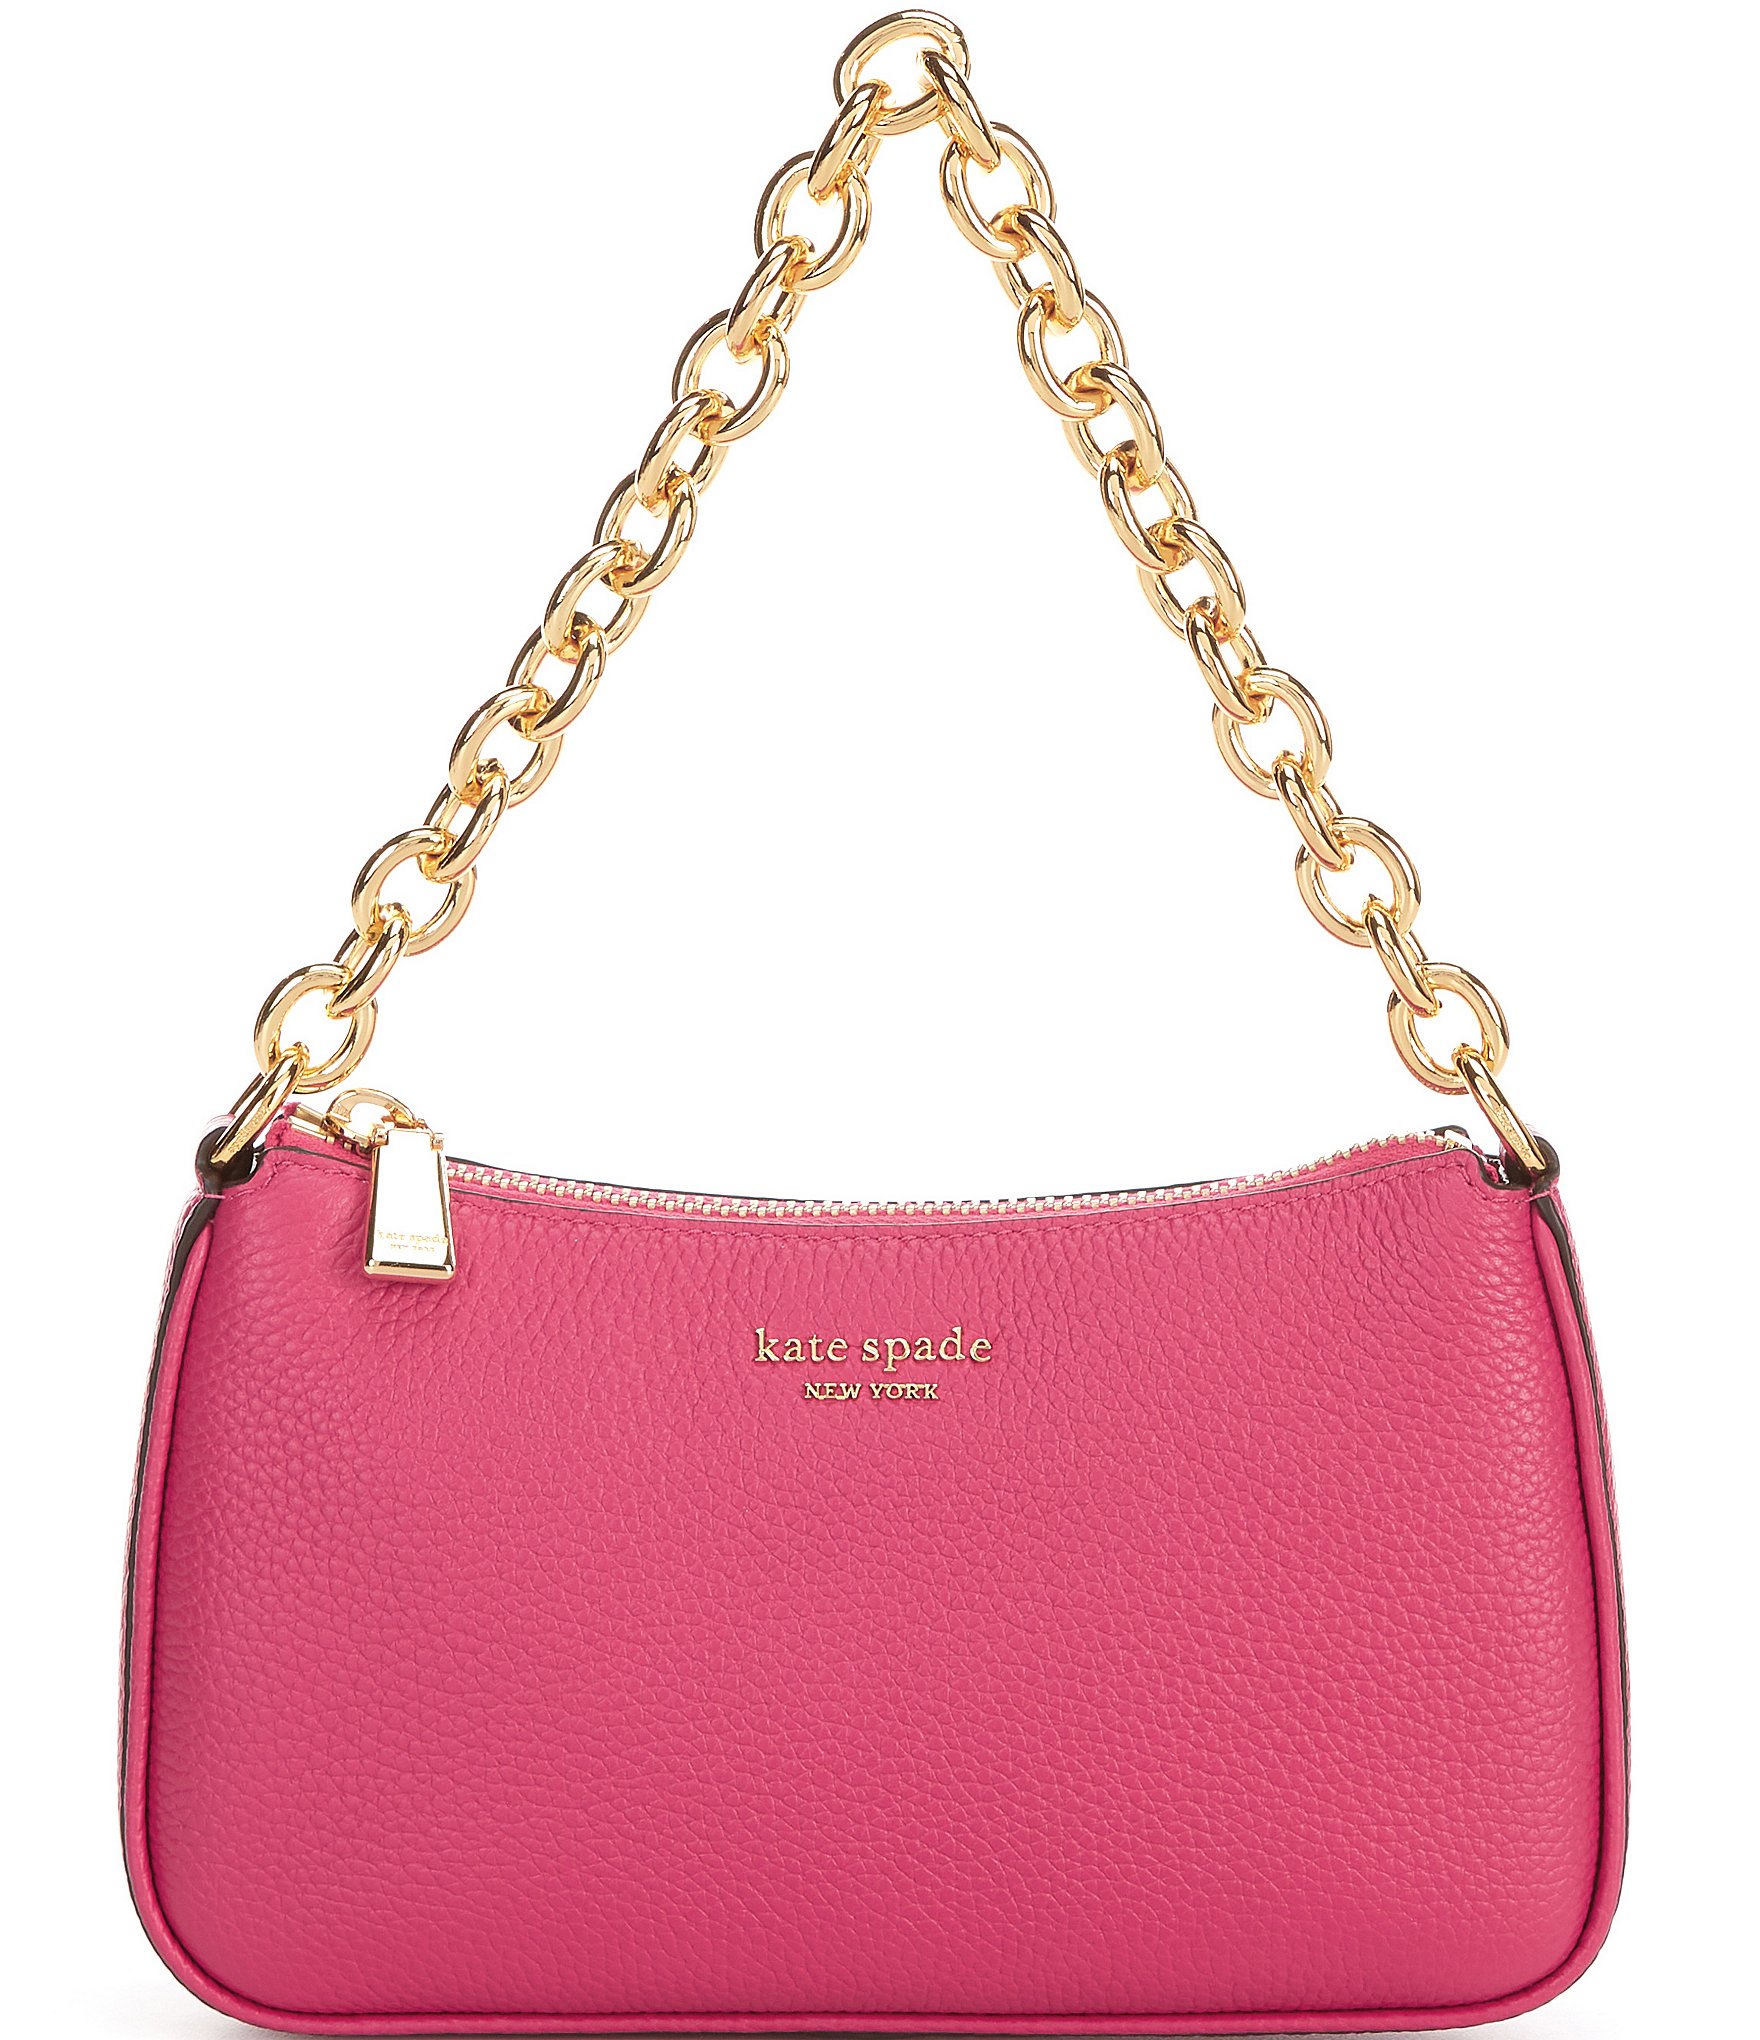 kate spade new york Jolie Pebbled Leather Small Convertible Crossbody ...